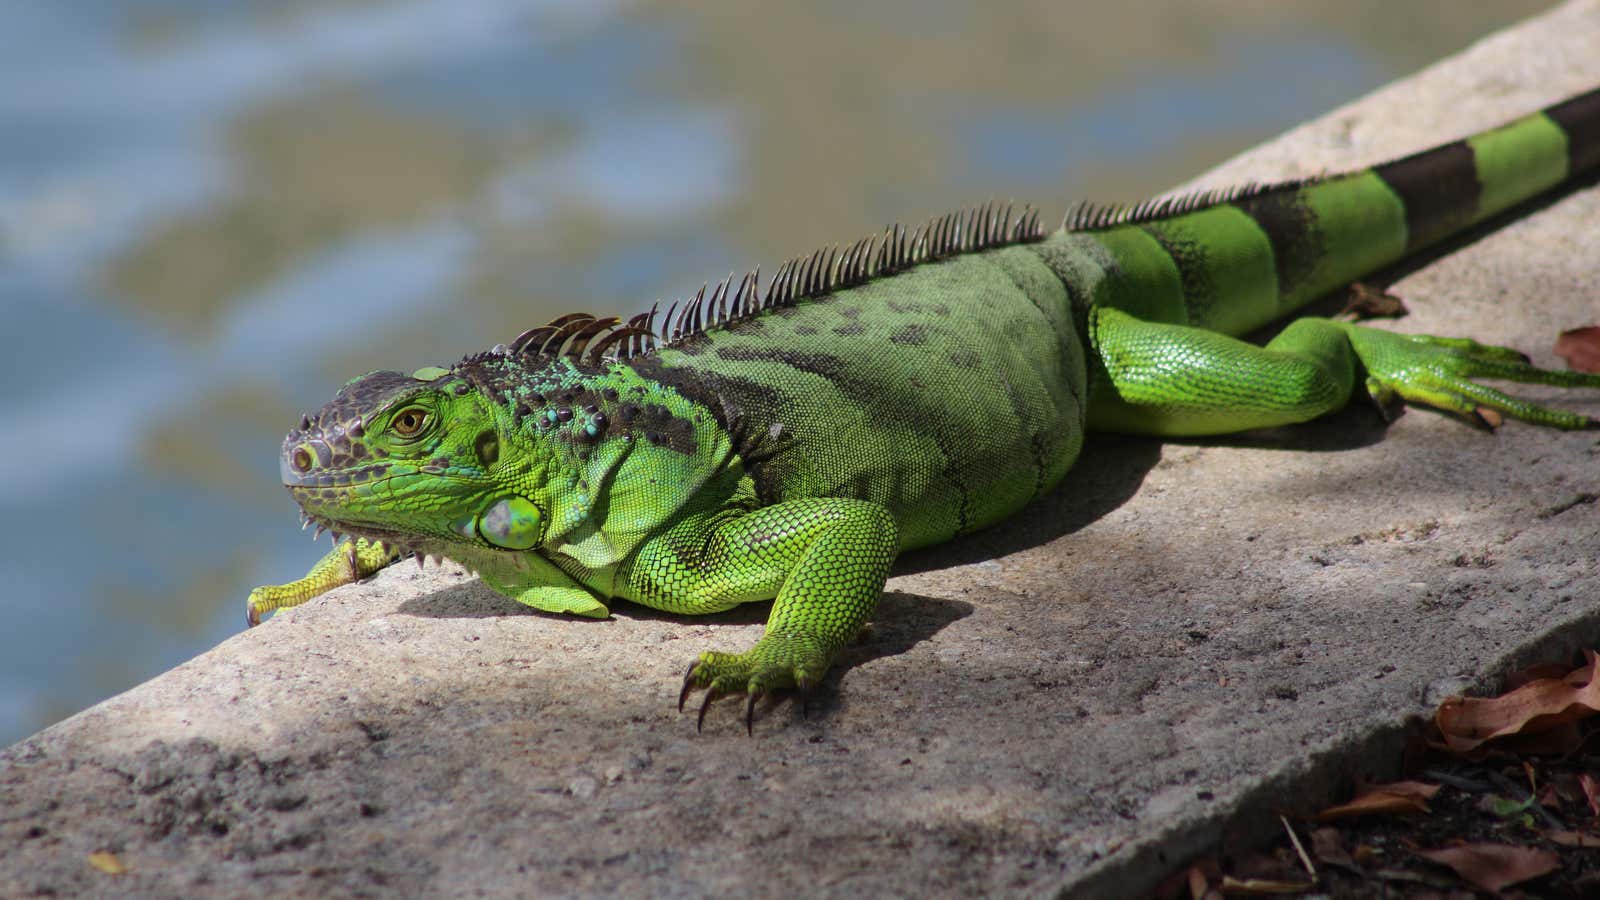 Green iguanas aren’t welcome to settle in Florida.